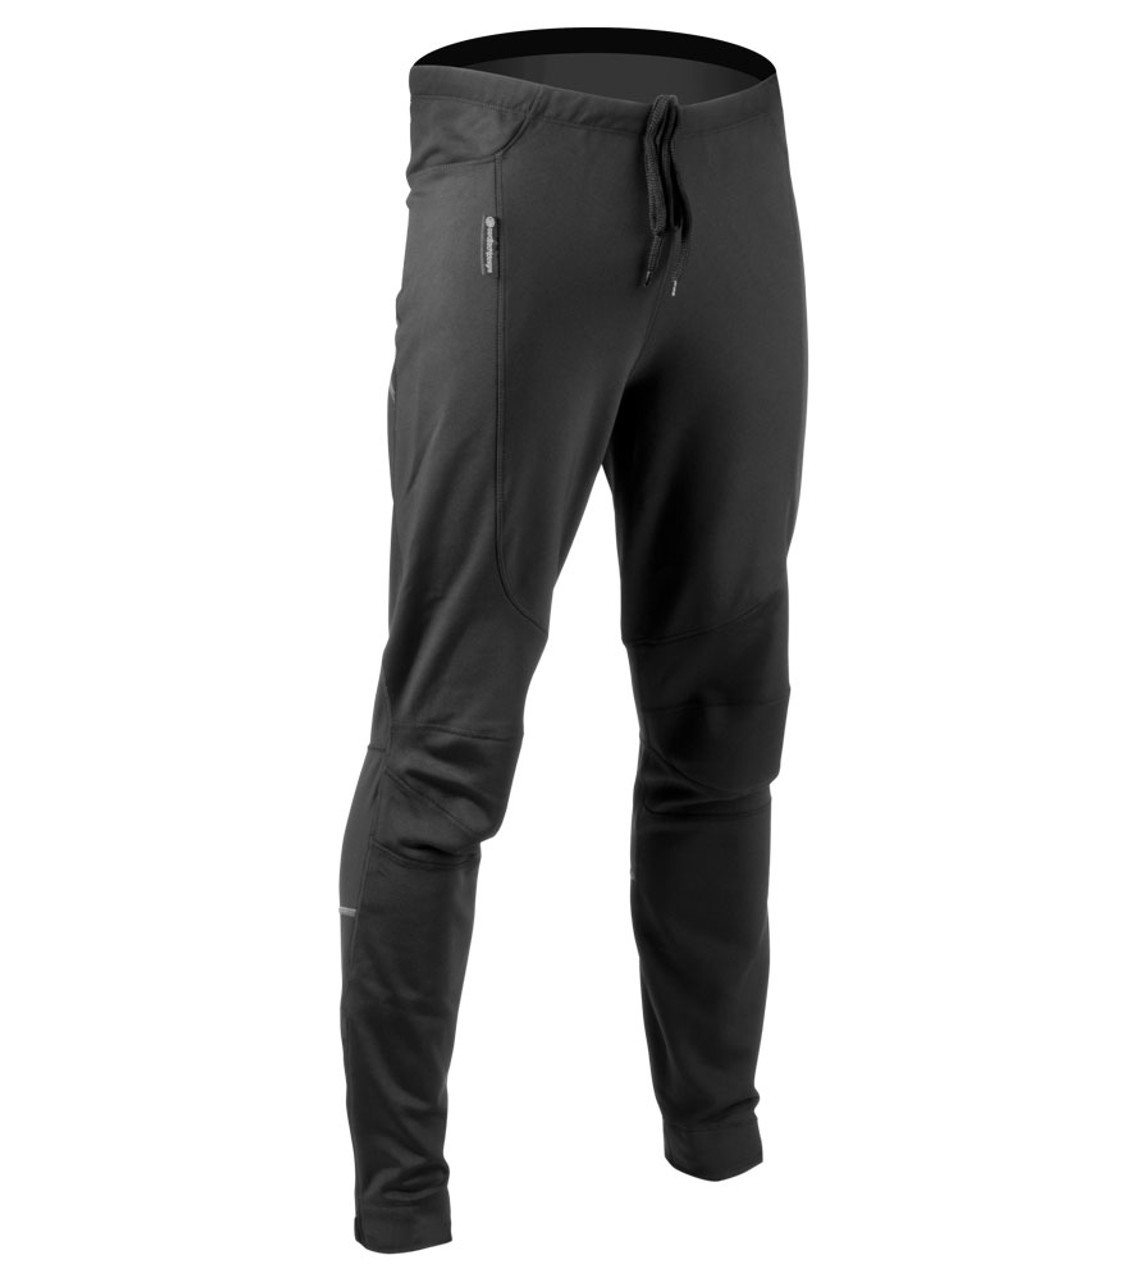 Shop Everyday Winter Thermal Pant, Black